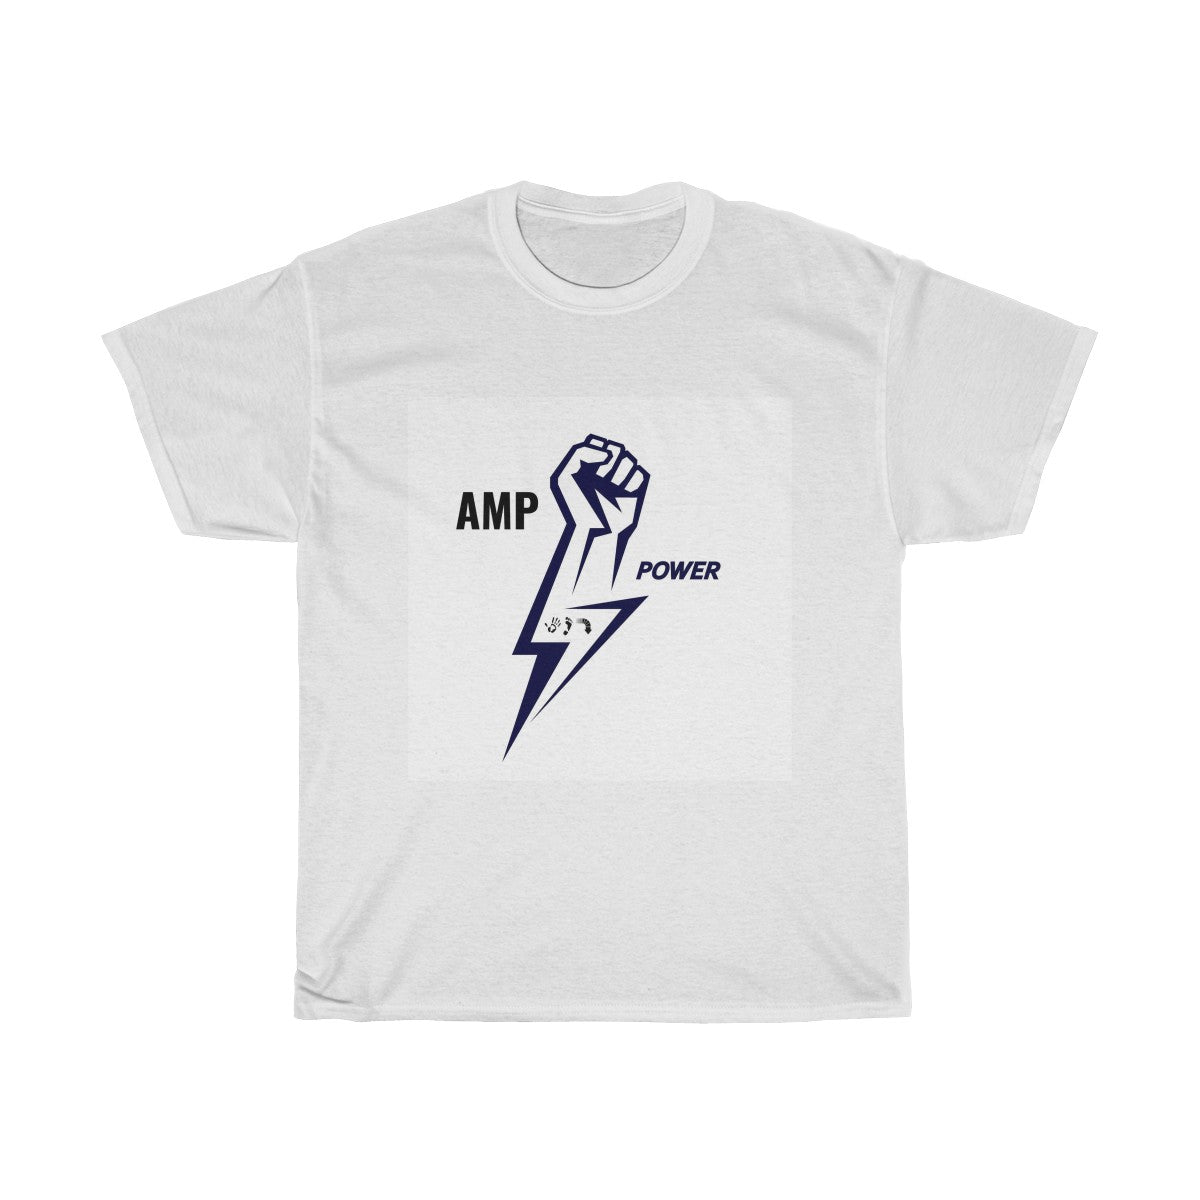 Five Toes Down Amp Power Unisex Tee